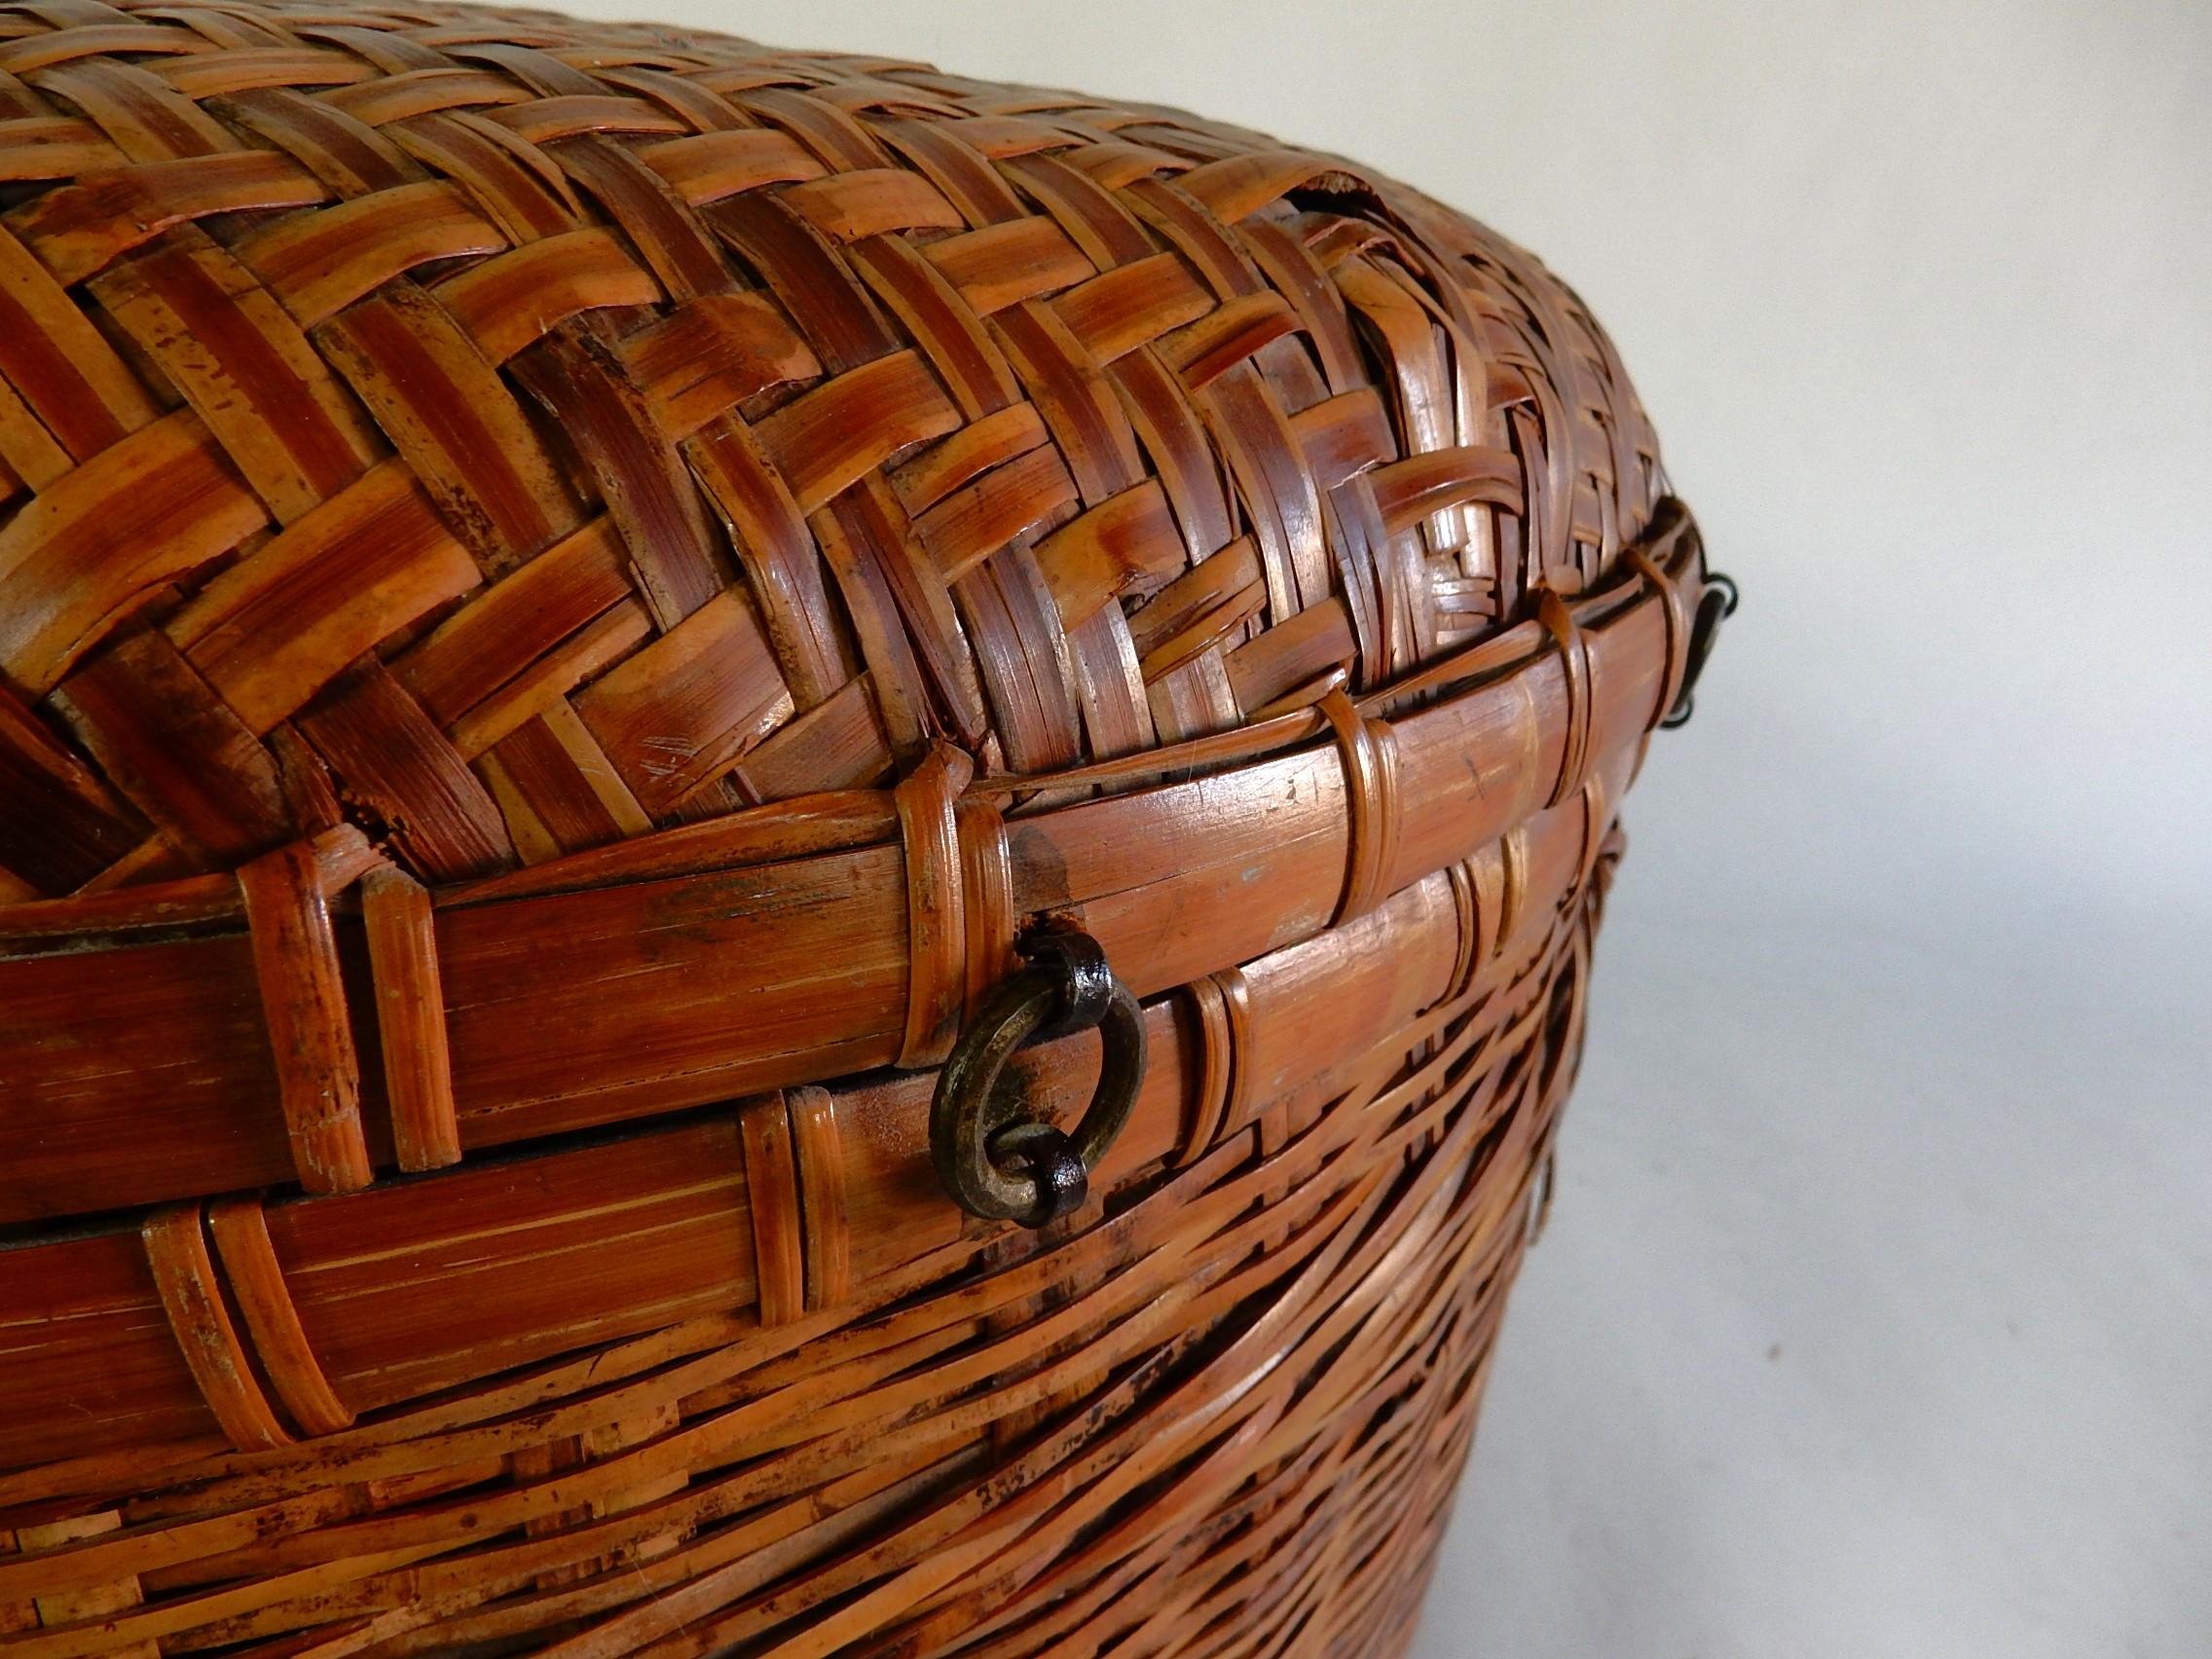 Hand-Woven Large 19th C. Qing period Chinese Woven Bamboo & Cane Lidded Basket  For Sale